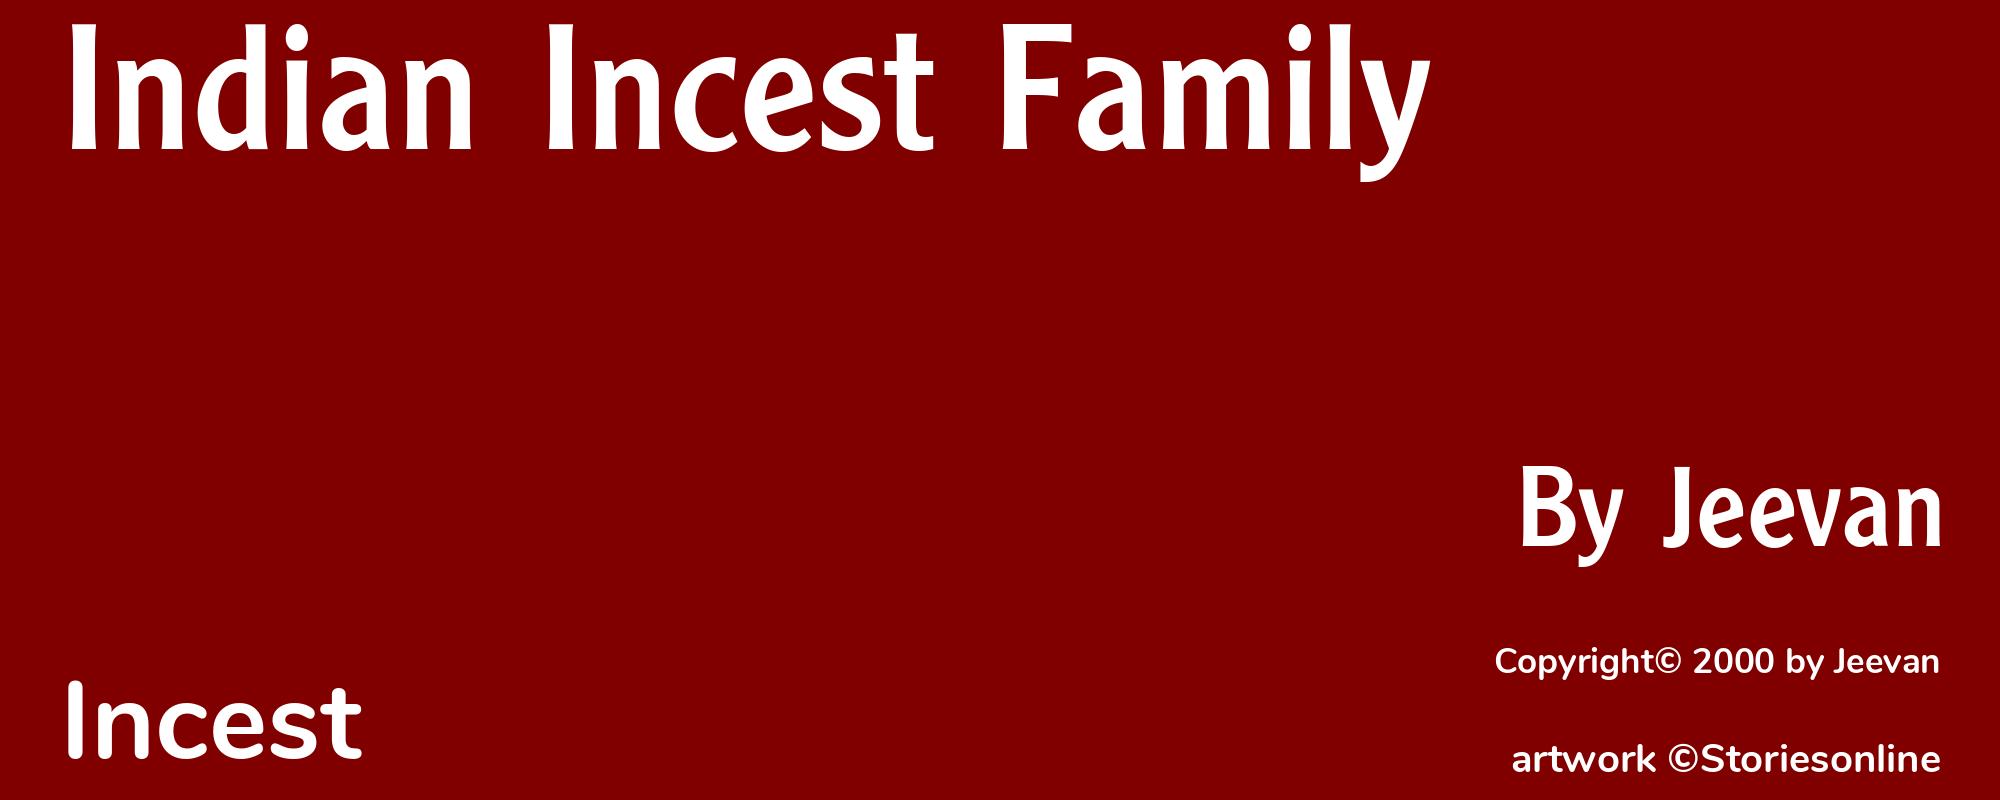 Indian Incest Family - Cover